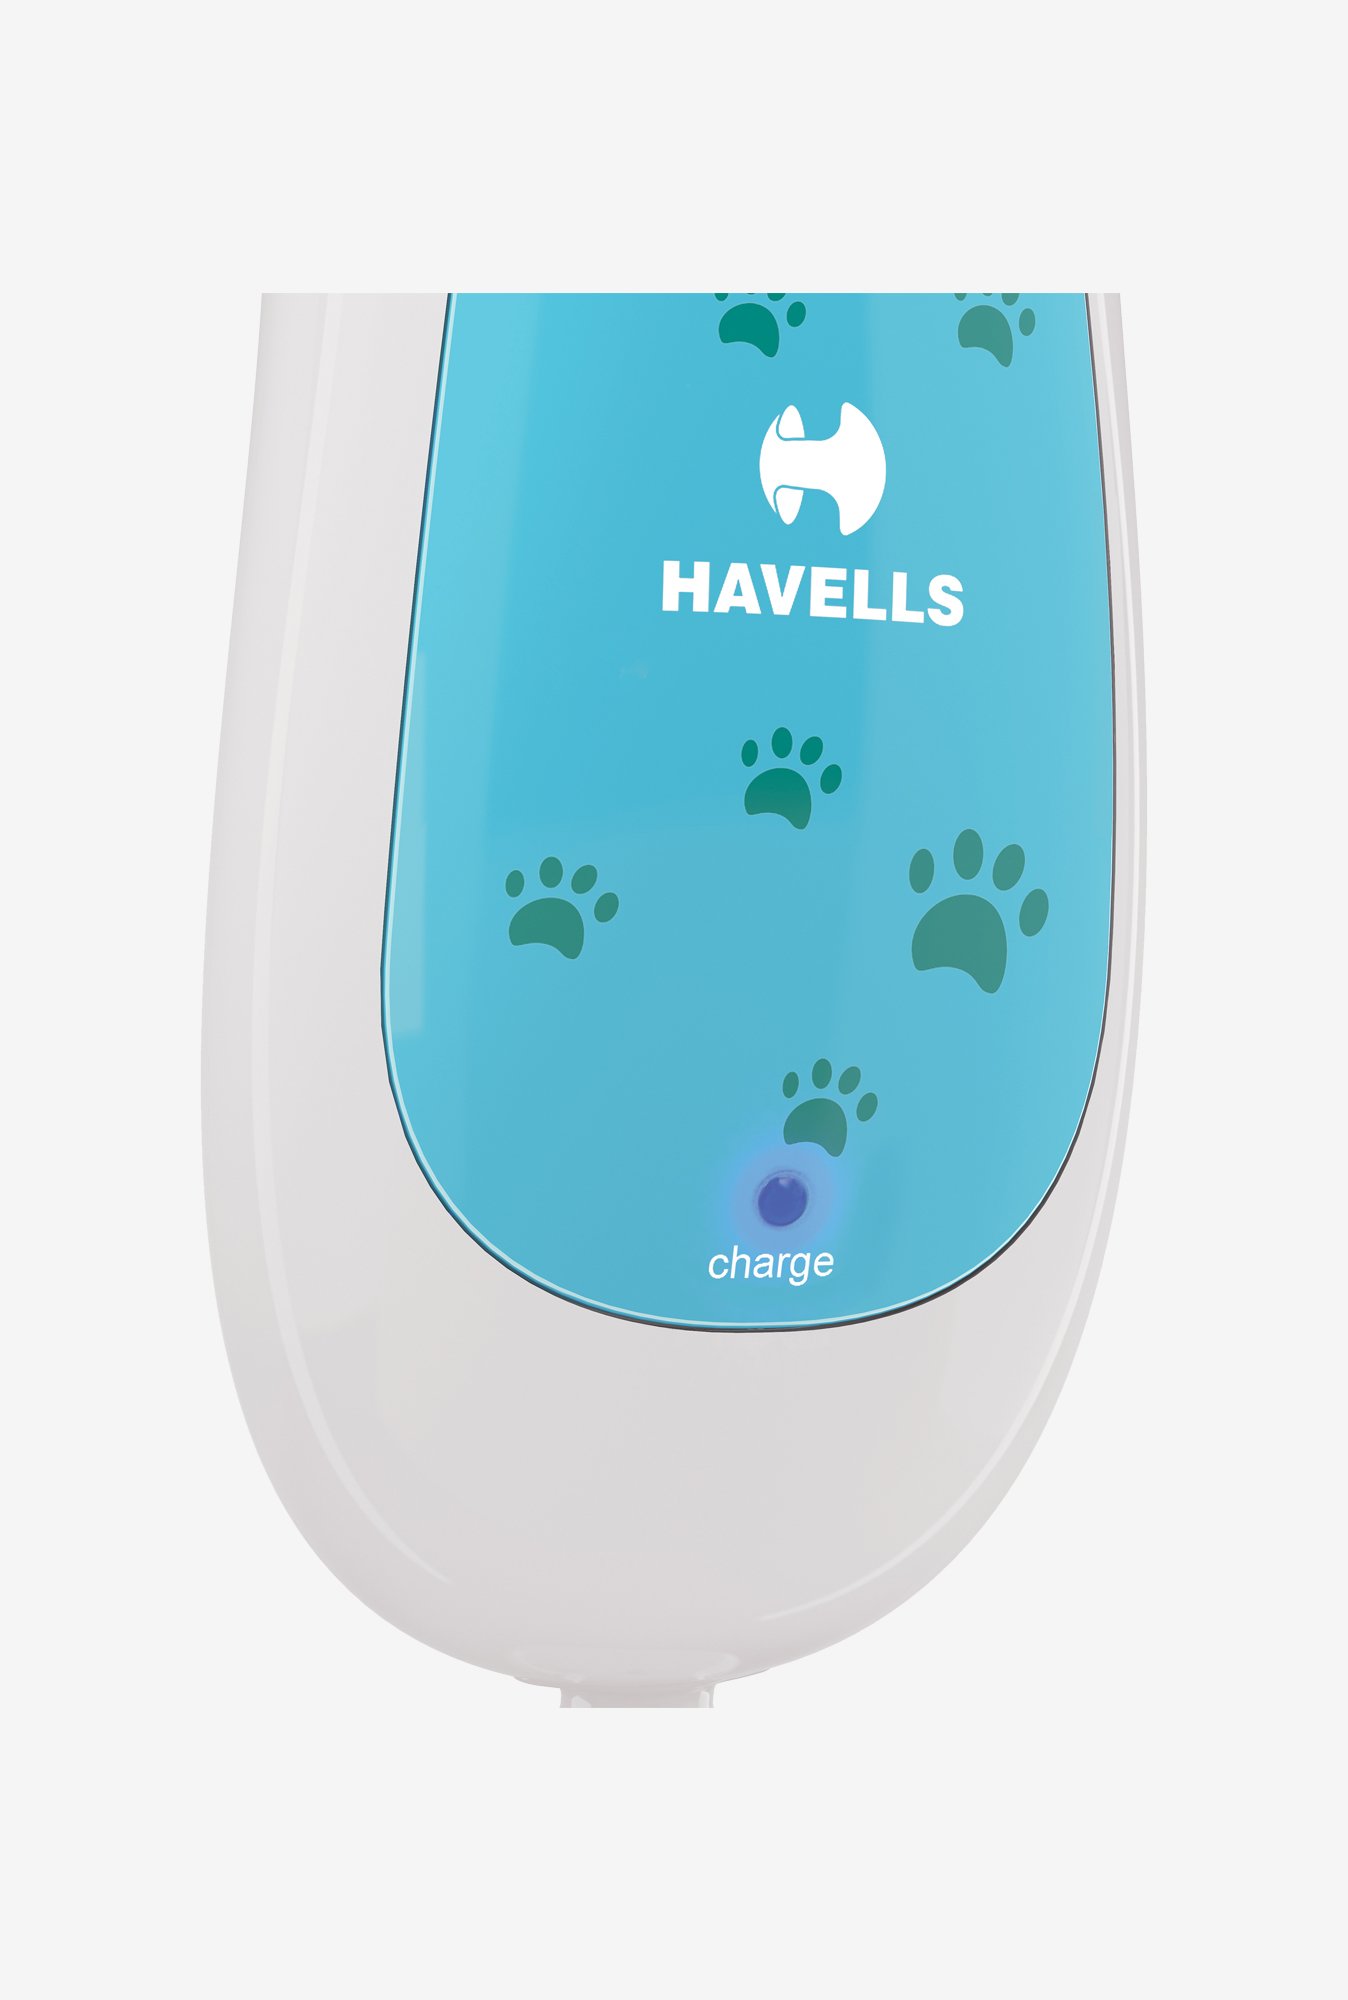 havells baby clipper